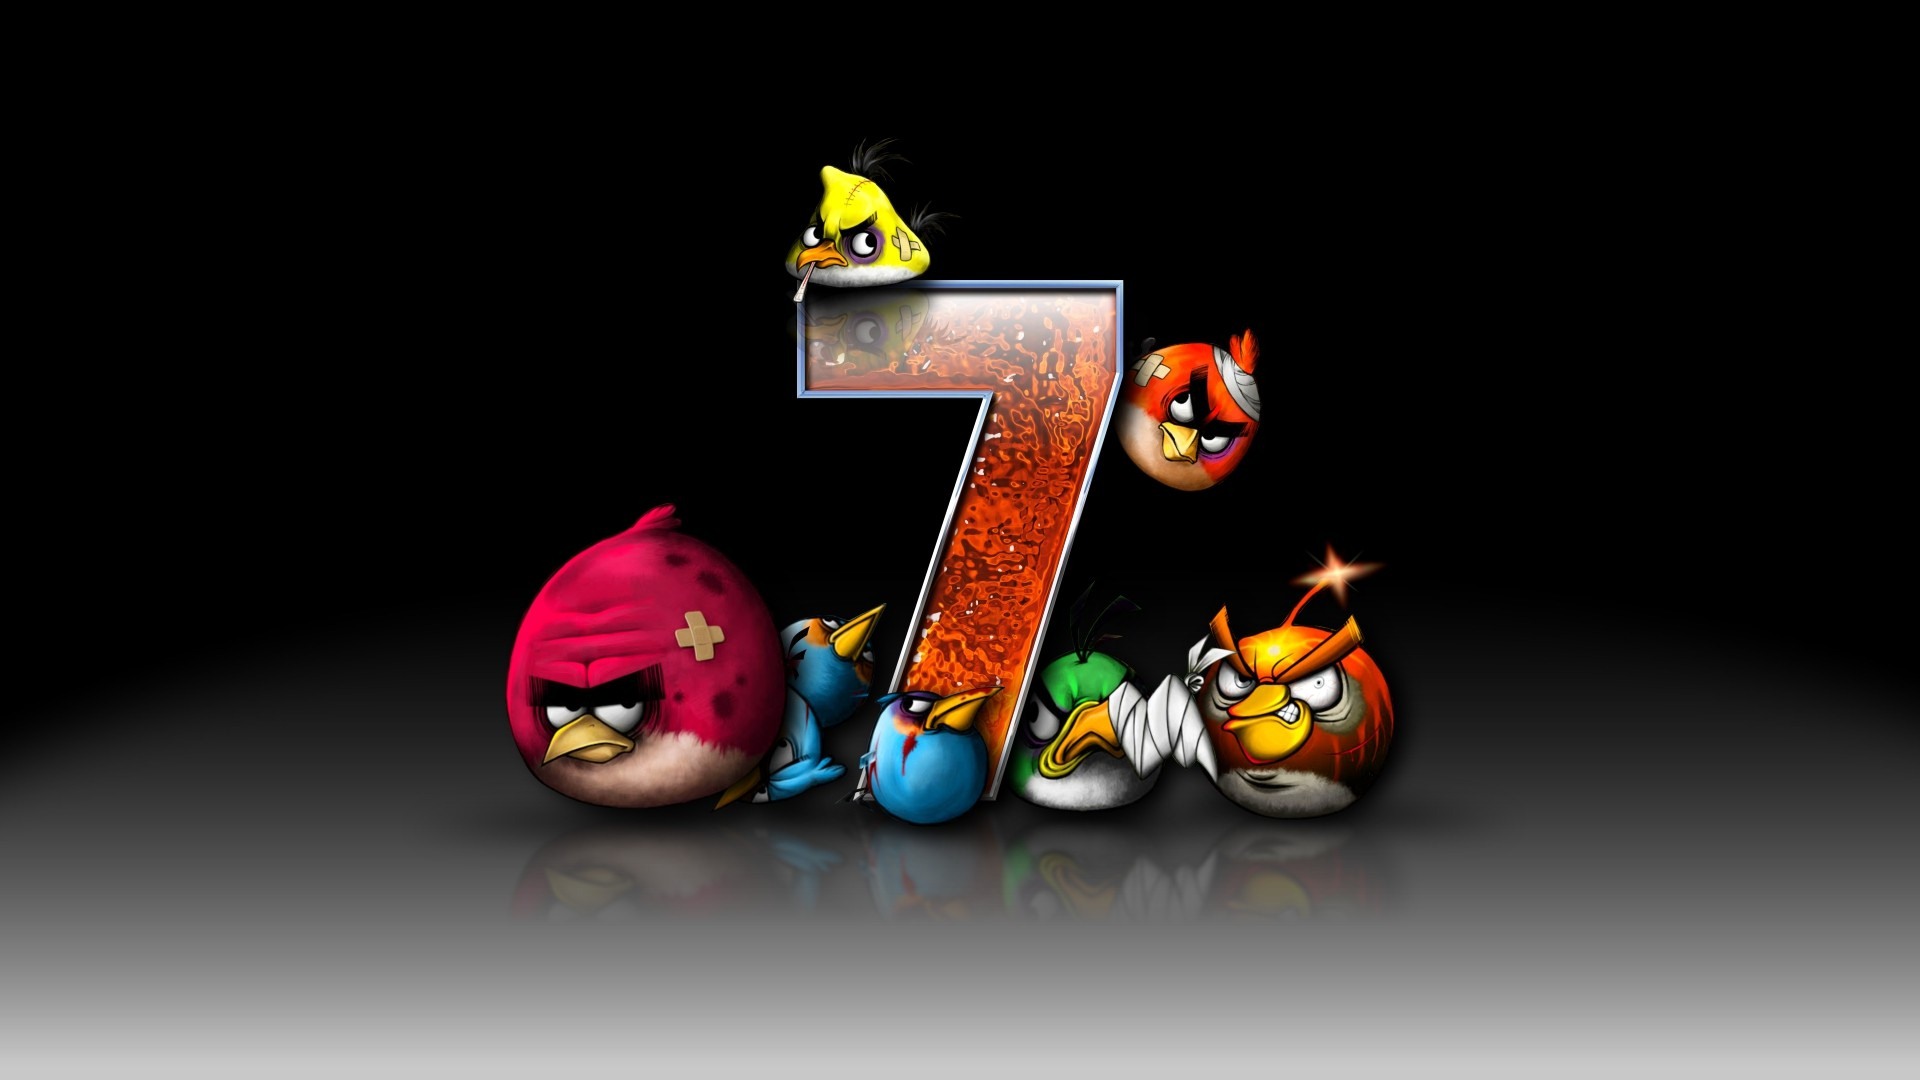 Angry Birds Game Wallpapers #17 - 1920x1080